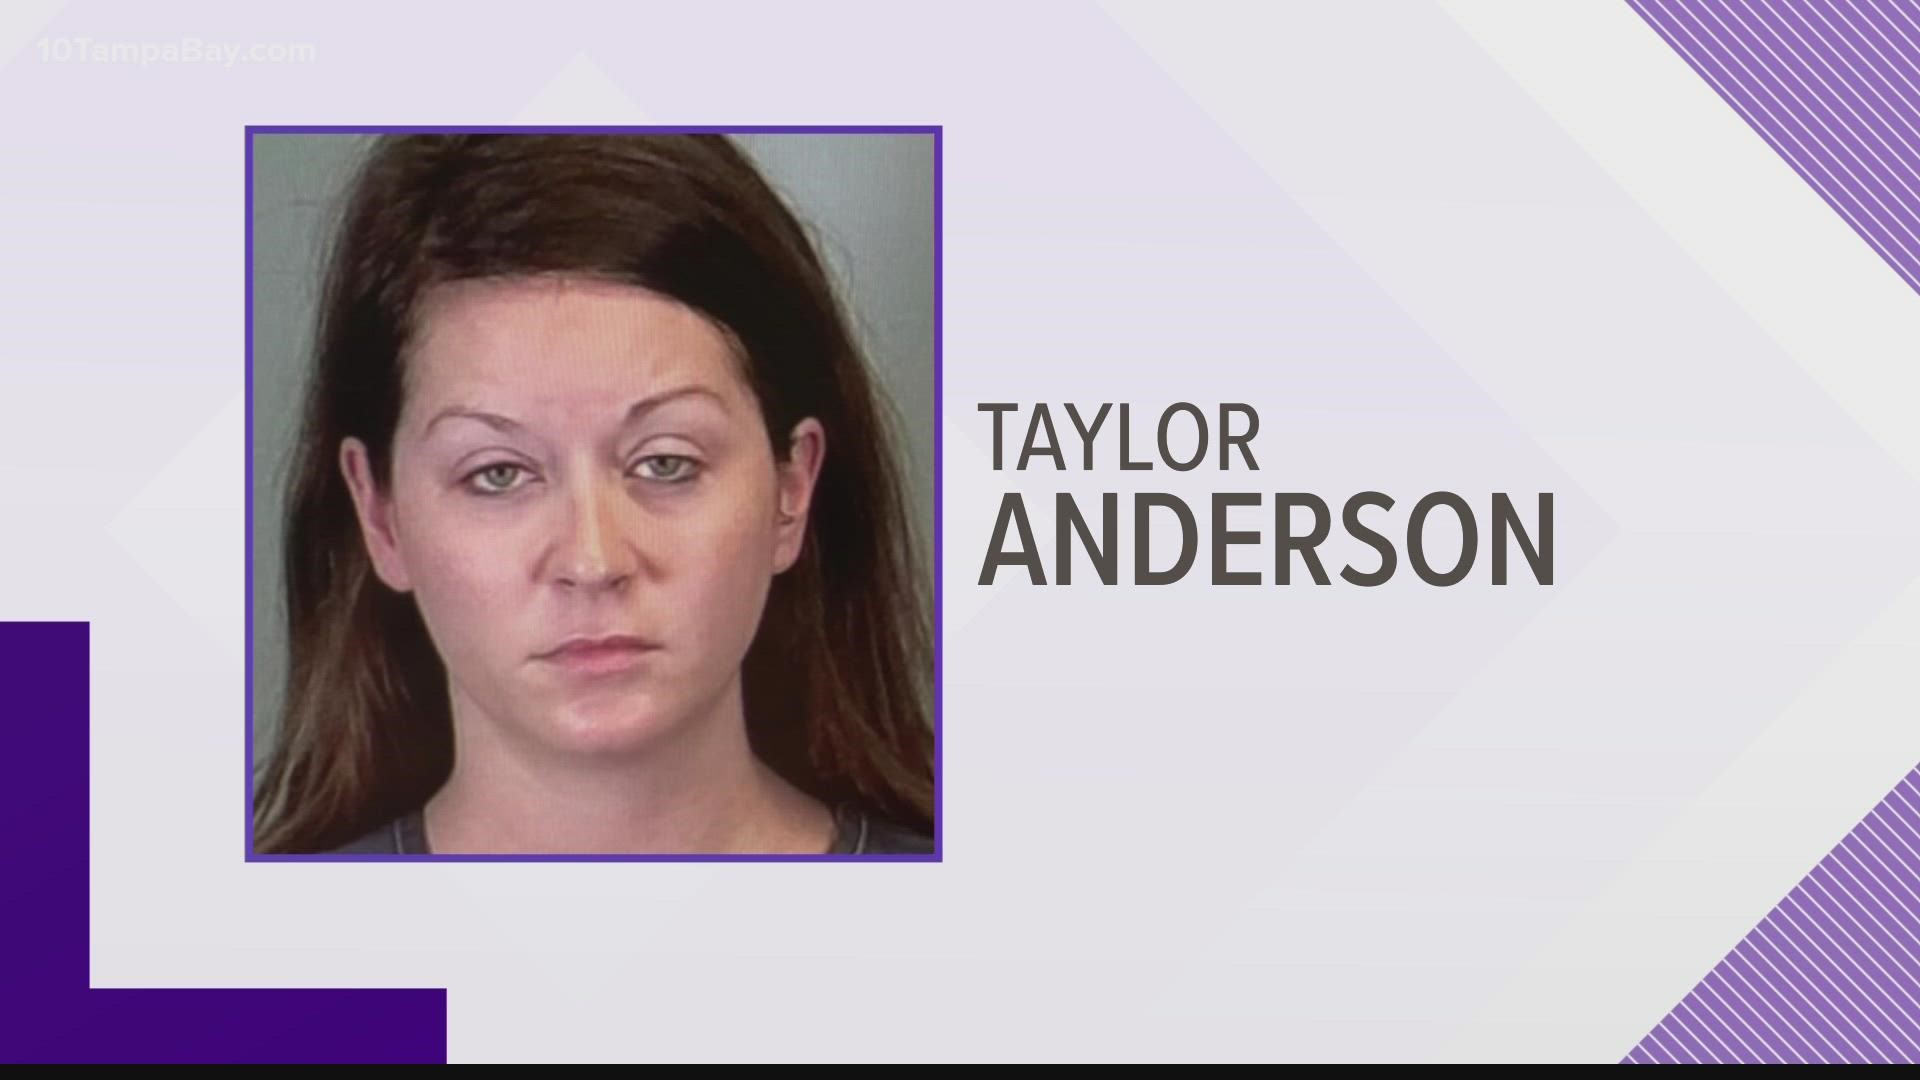 Manatee County deputies say Taylor Anderson, 38, had an "unlawful relationship" with the student.